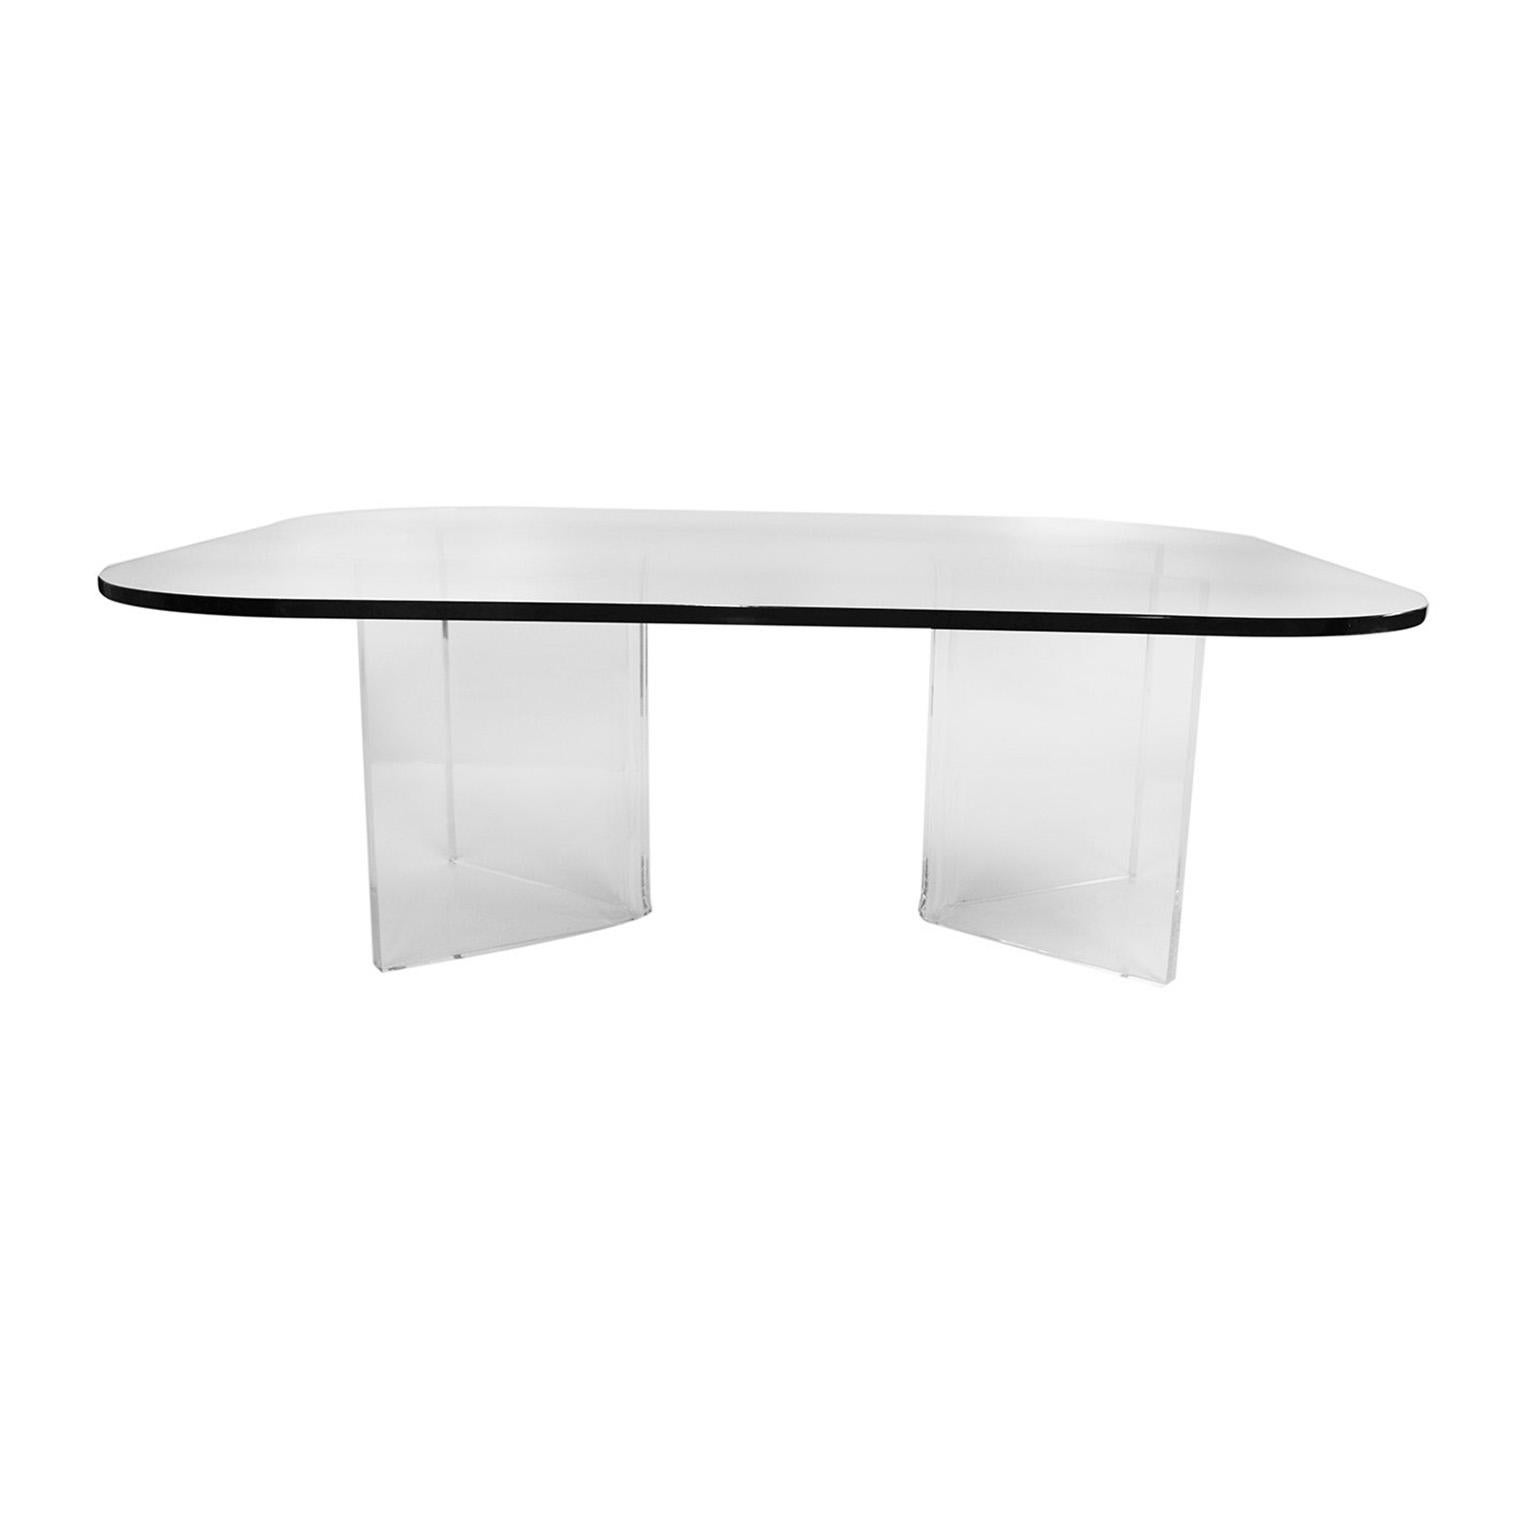 An elegant, stylish midcentury rectangular rounded corners glass top, with Lucite base coffee table. Features a unique two piece “V” shaped Lucite base supporting 1/2? thick glass rectangular top with radius corners. Table has two movable